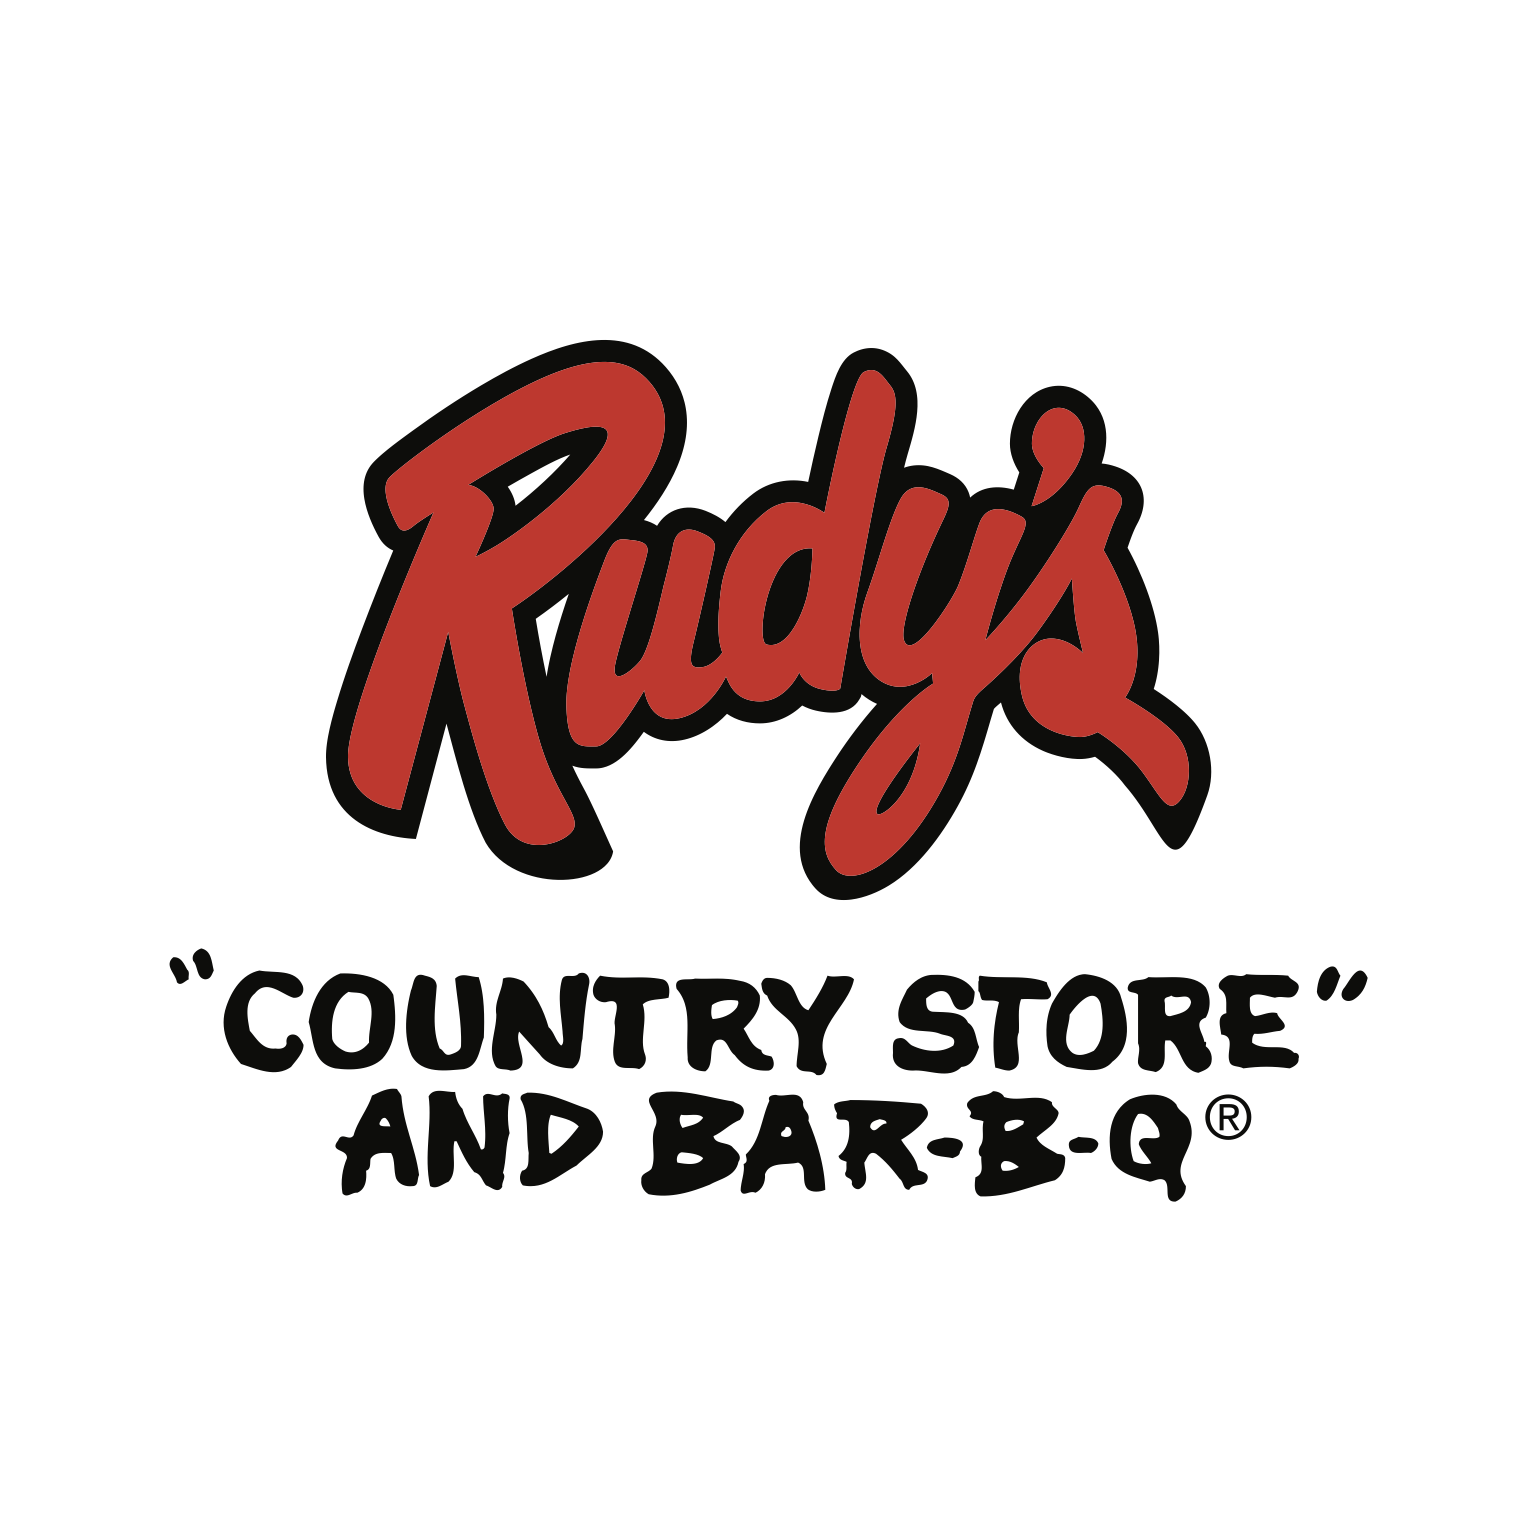 Rudy's "Country Store" and Bar-B-Q Photo